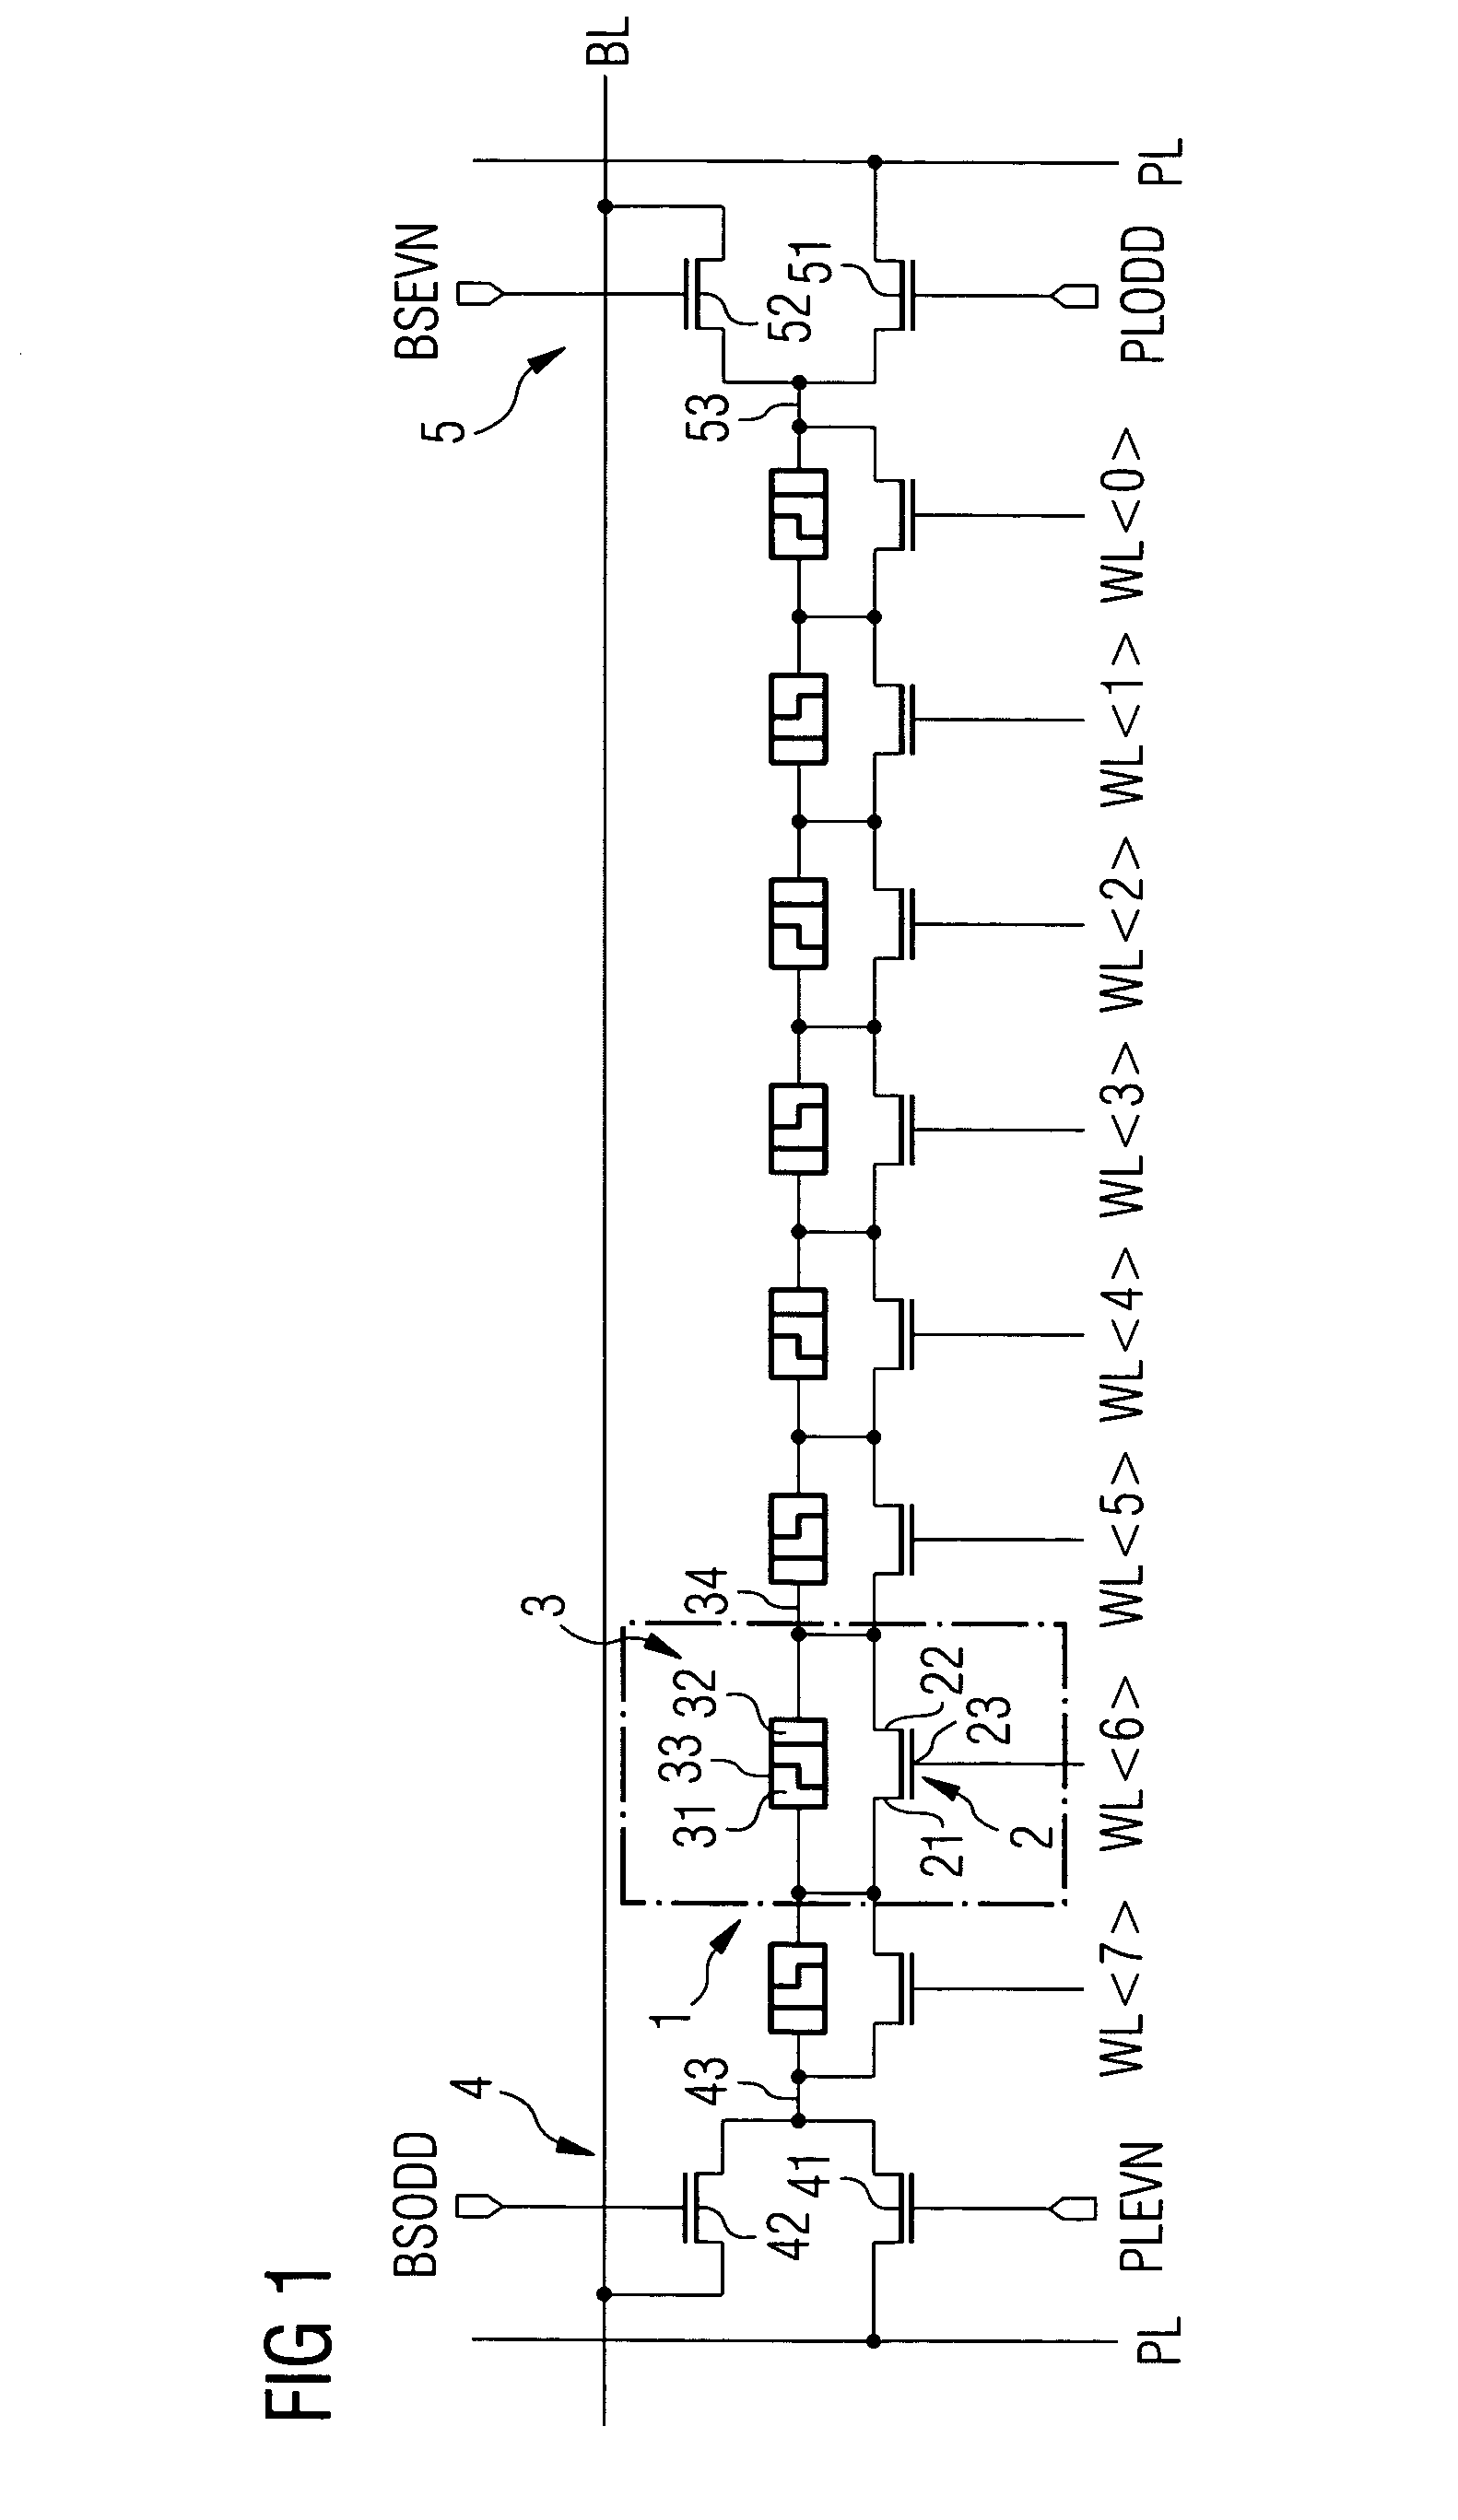 Memory circuit having memory cells which have a resistance memory element